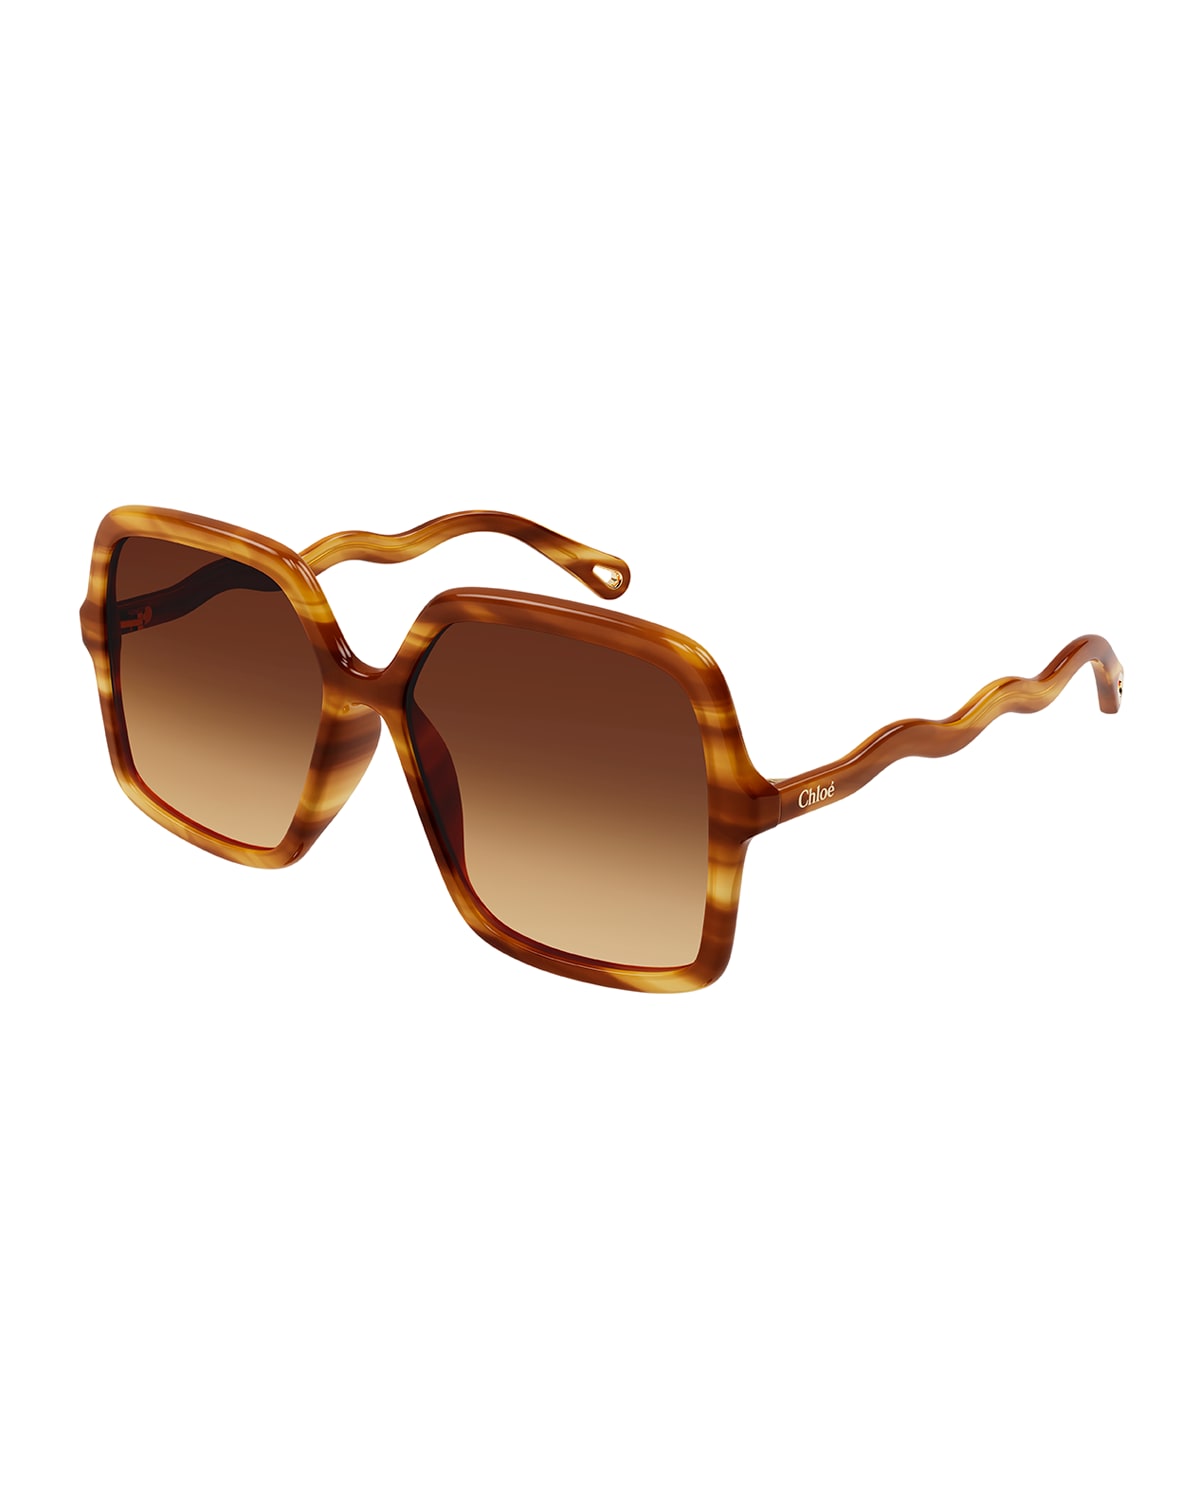 Chloé Wavy Rectangle Acetate Sunglasses In 002 Shiny Blonde